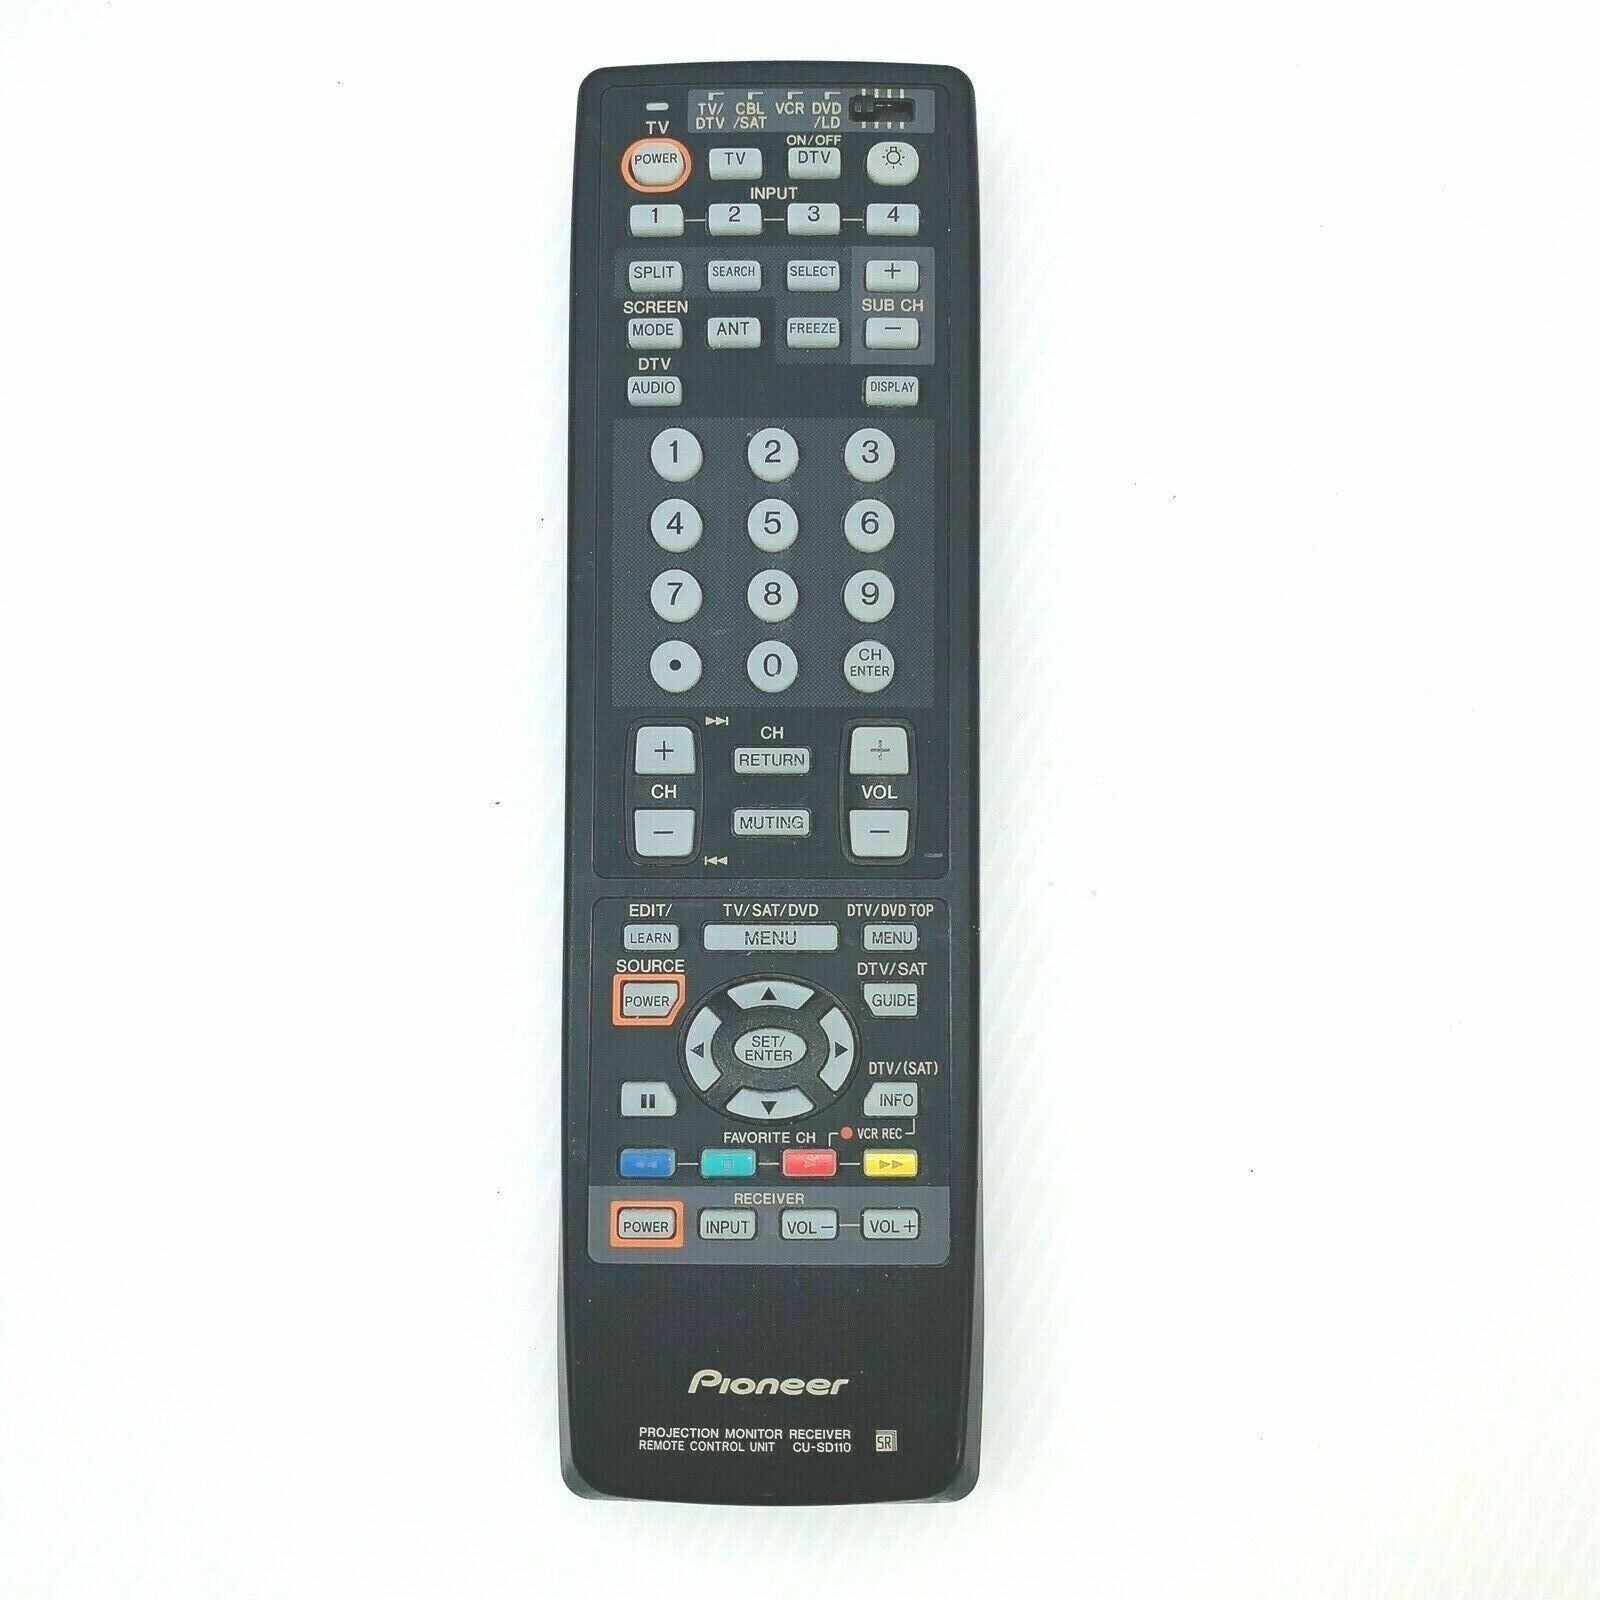 Pioneer Projection TV Monitor Receiver Remote Control CU-SD110 OEM Factory Works